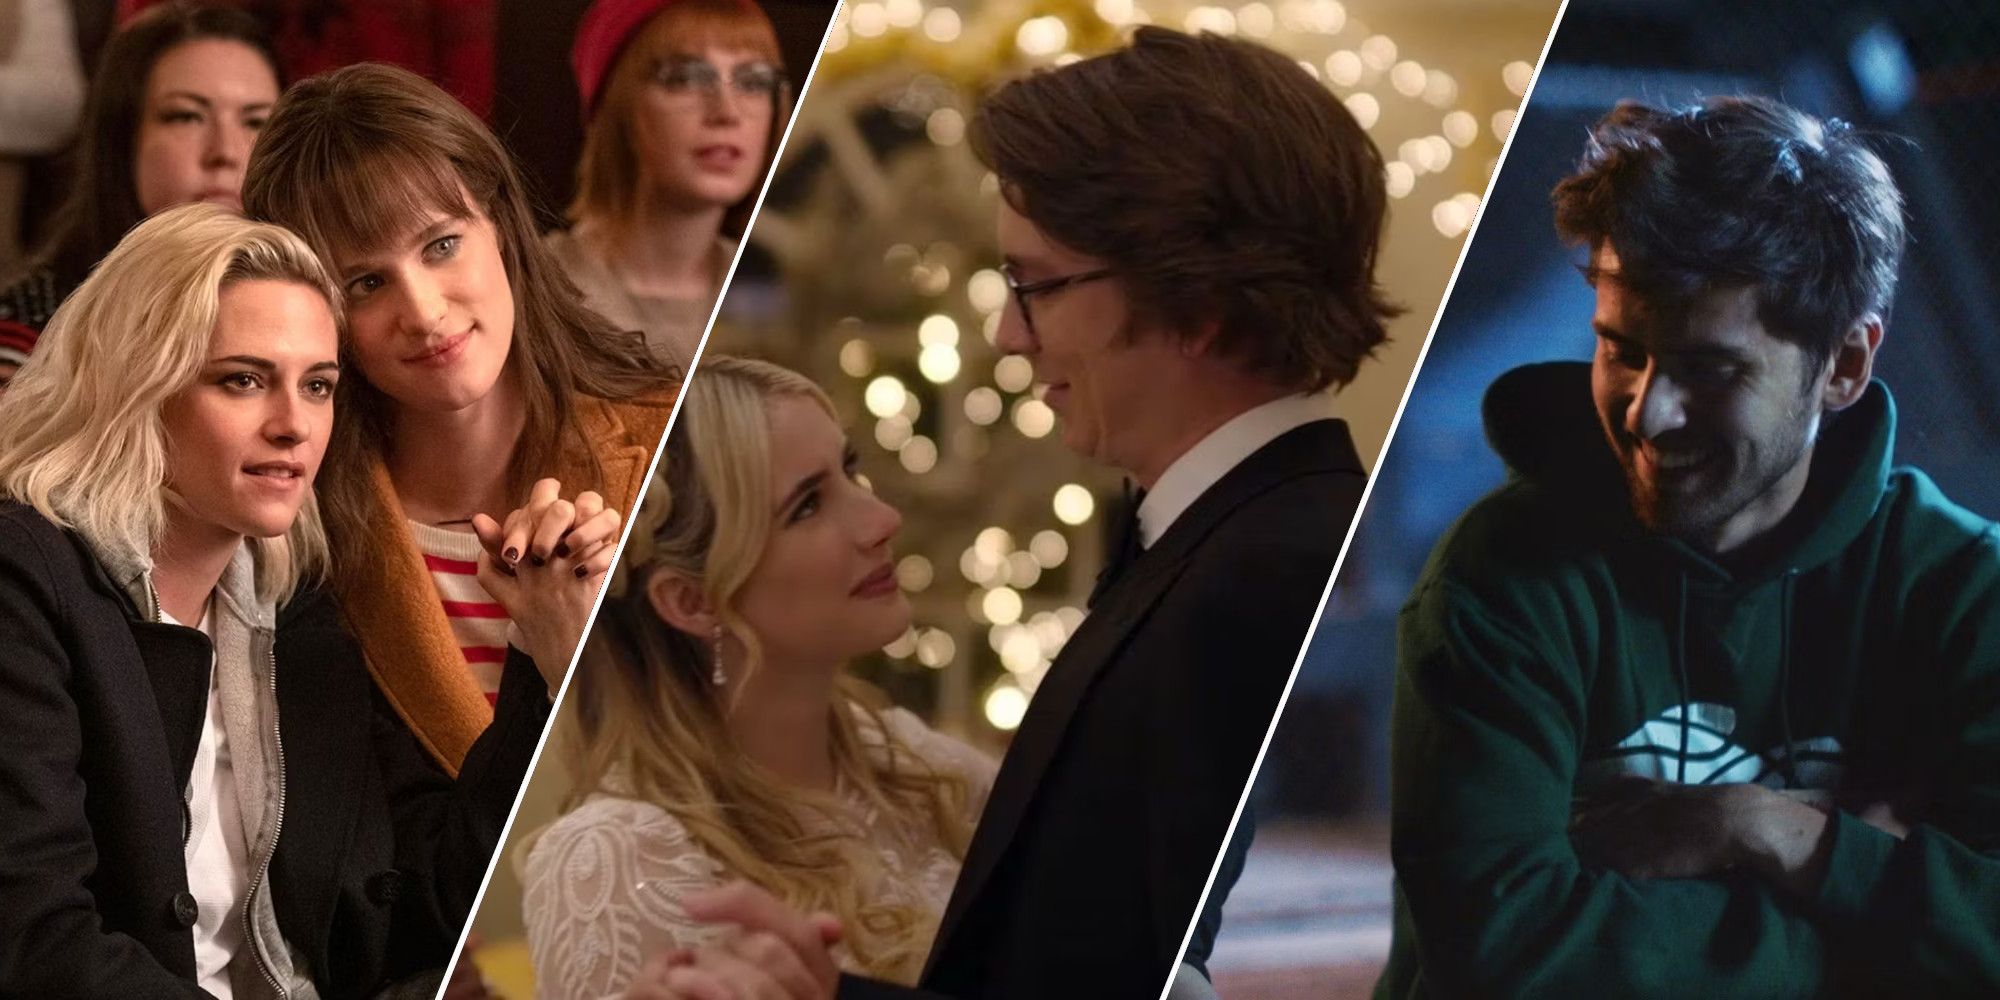 A collage of rom-coms from the past5 years, featuring stills from Happiest Season, About Fate, and Shithouse